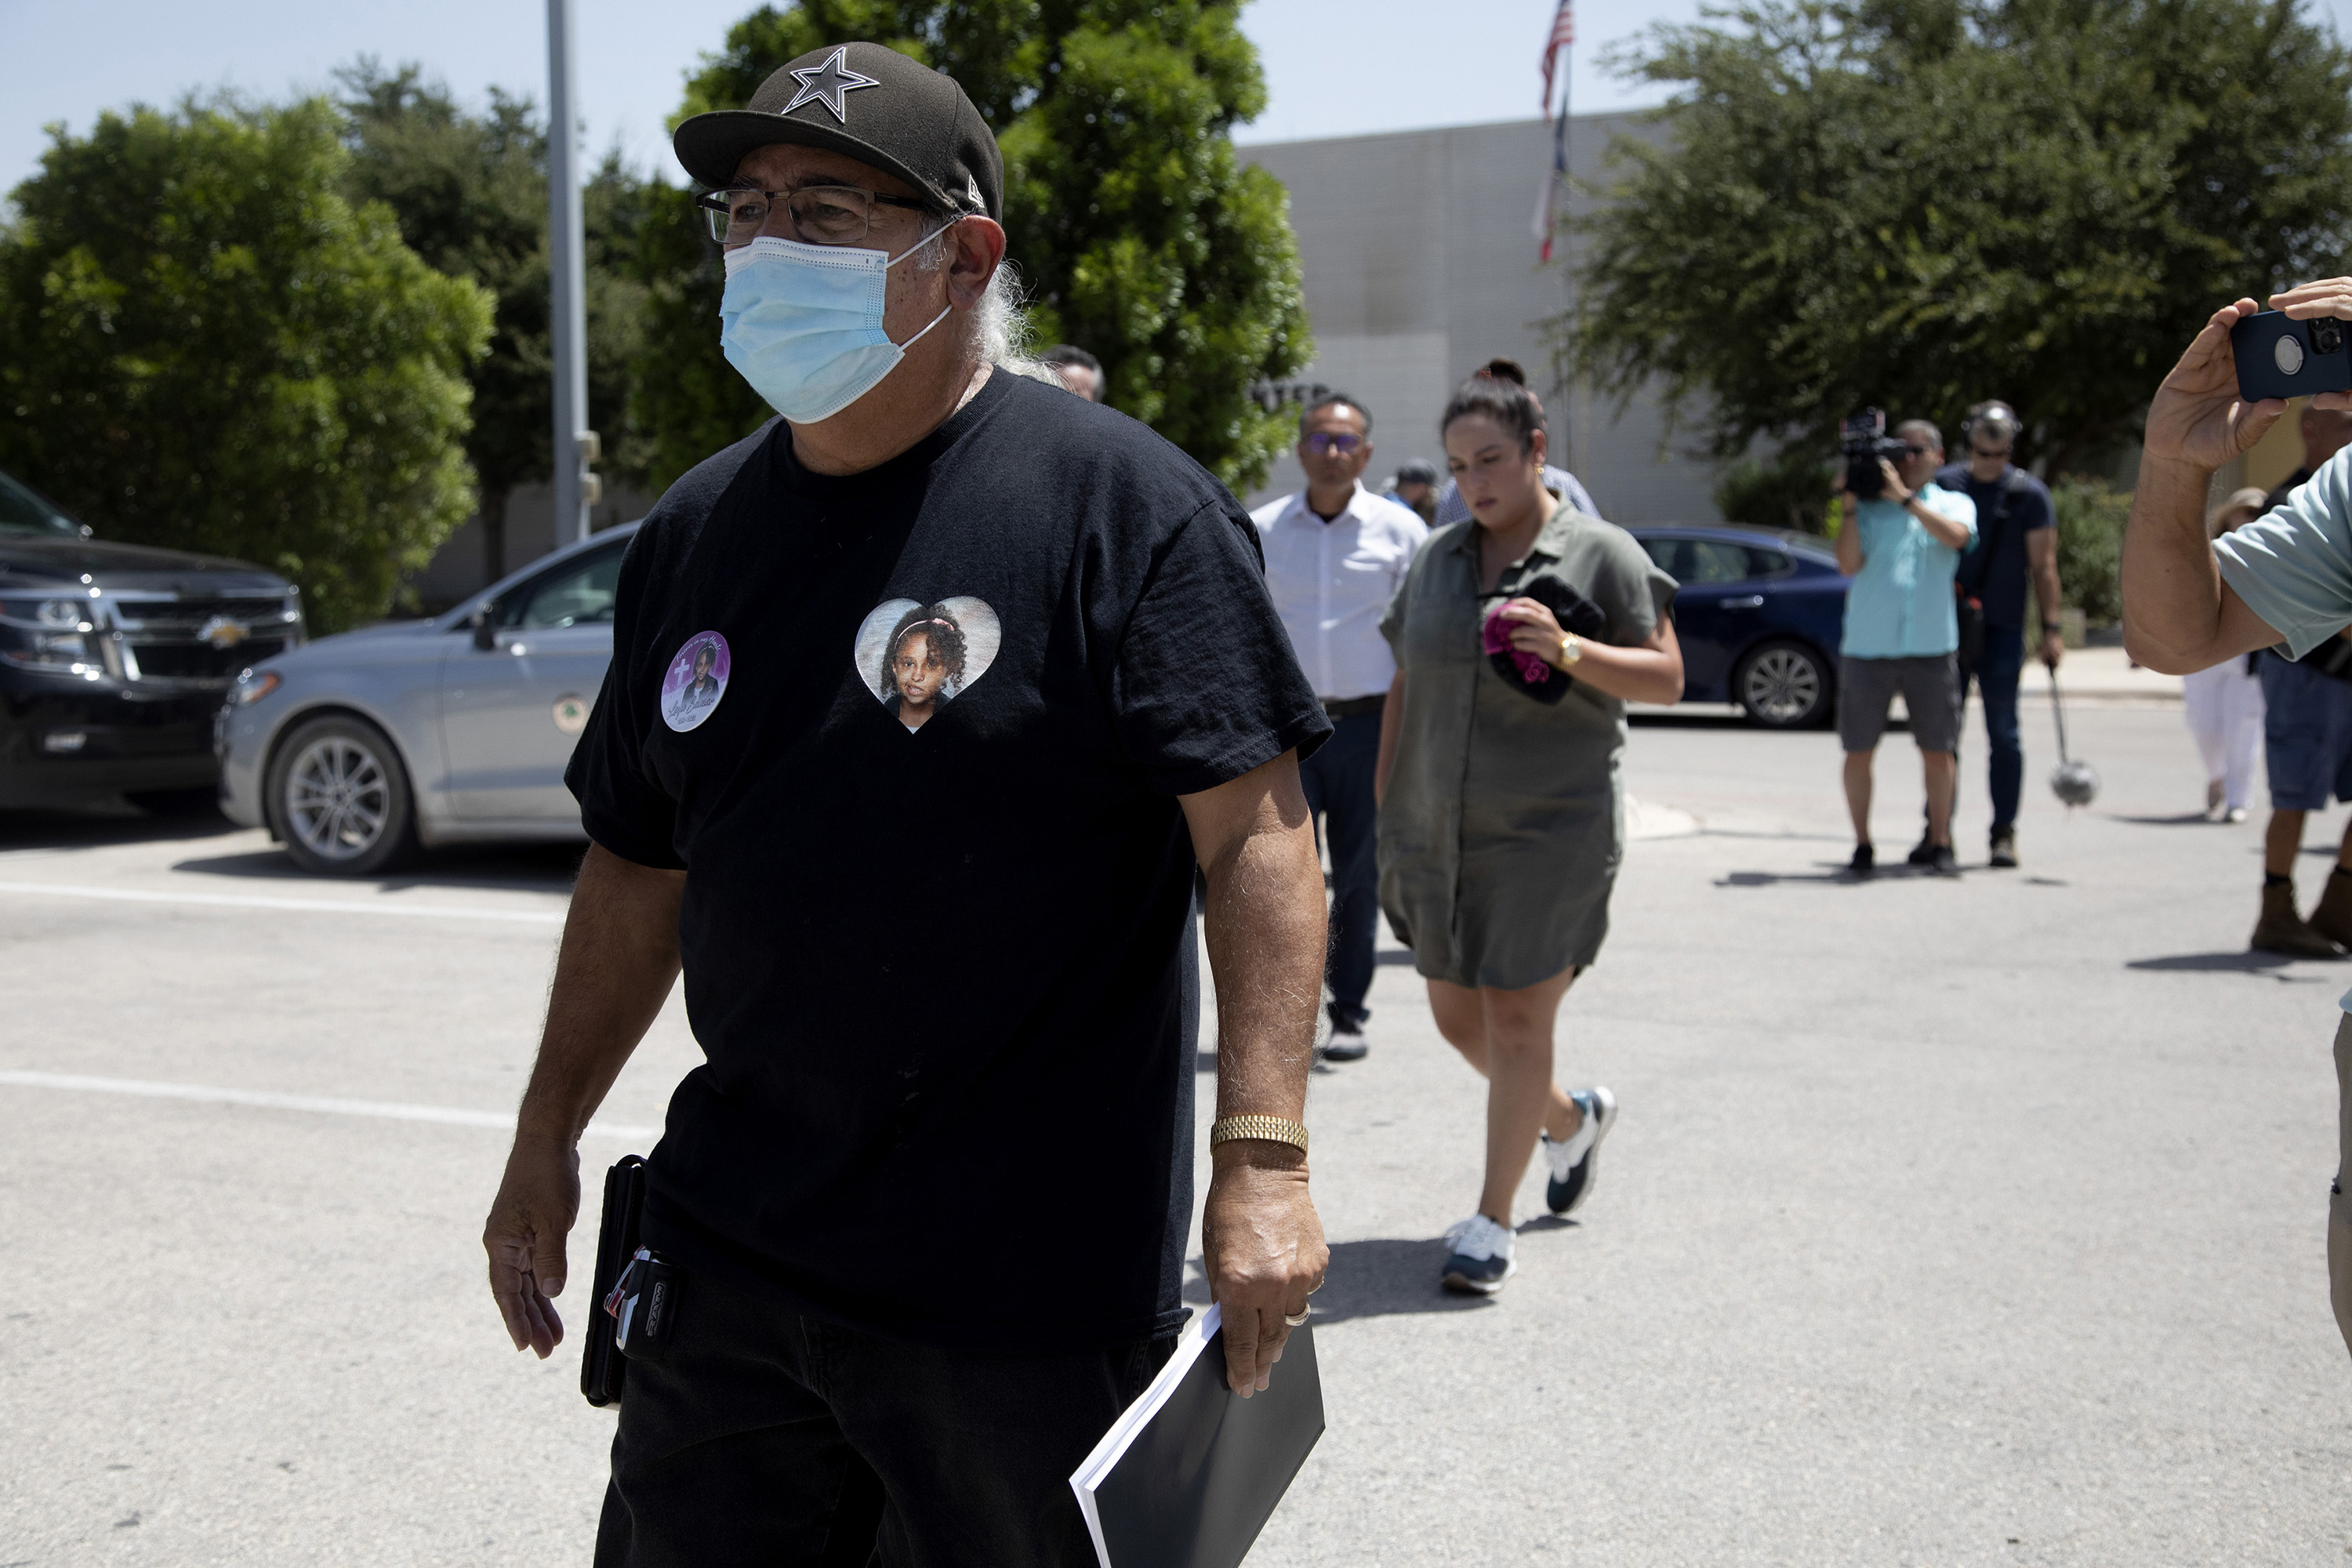 Vincent Salazar, grandfather of Layla Salazar who was killed in the school shooting at Robb Elementary, walks to his vehicle holding his copy of the report.